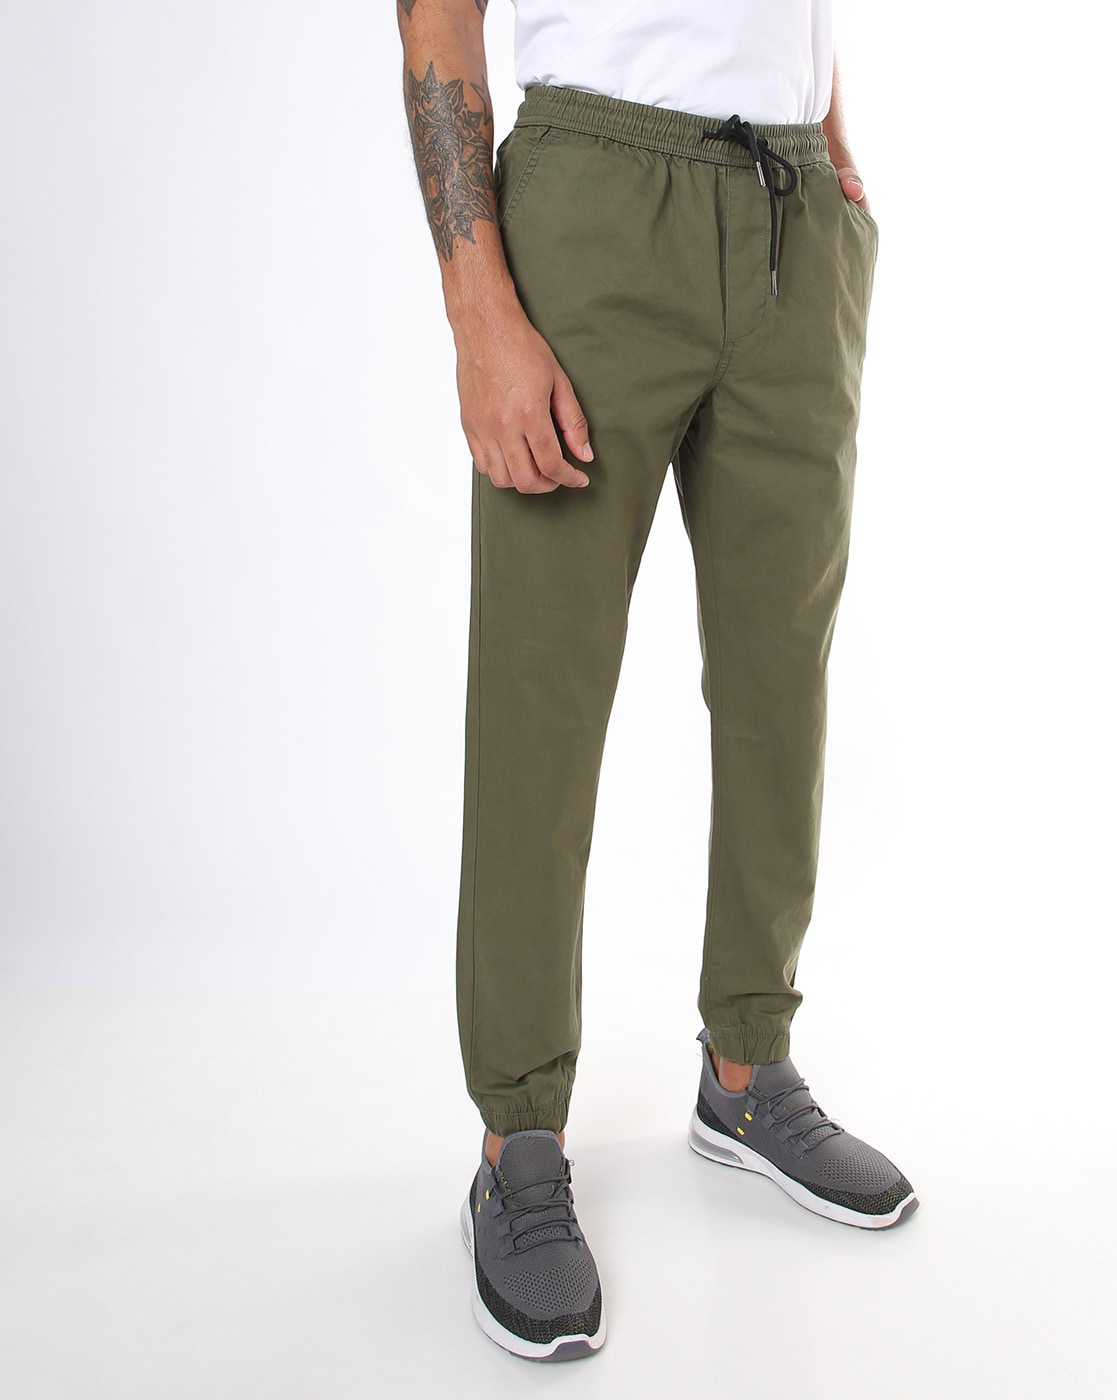 1897 Active Diamond Stretch Joggers for Men in Olive Green